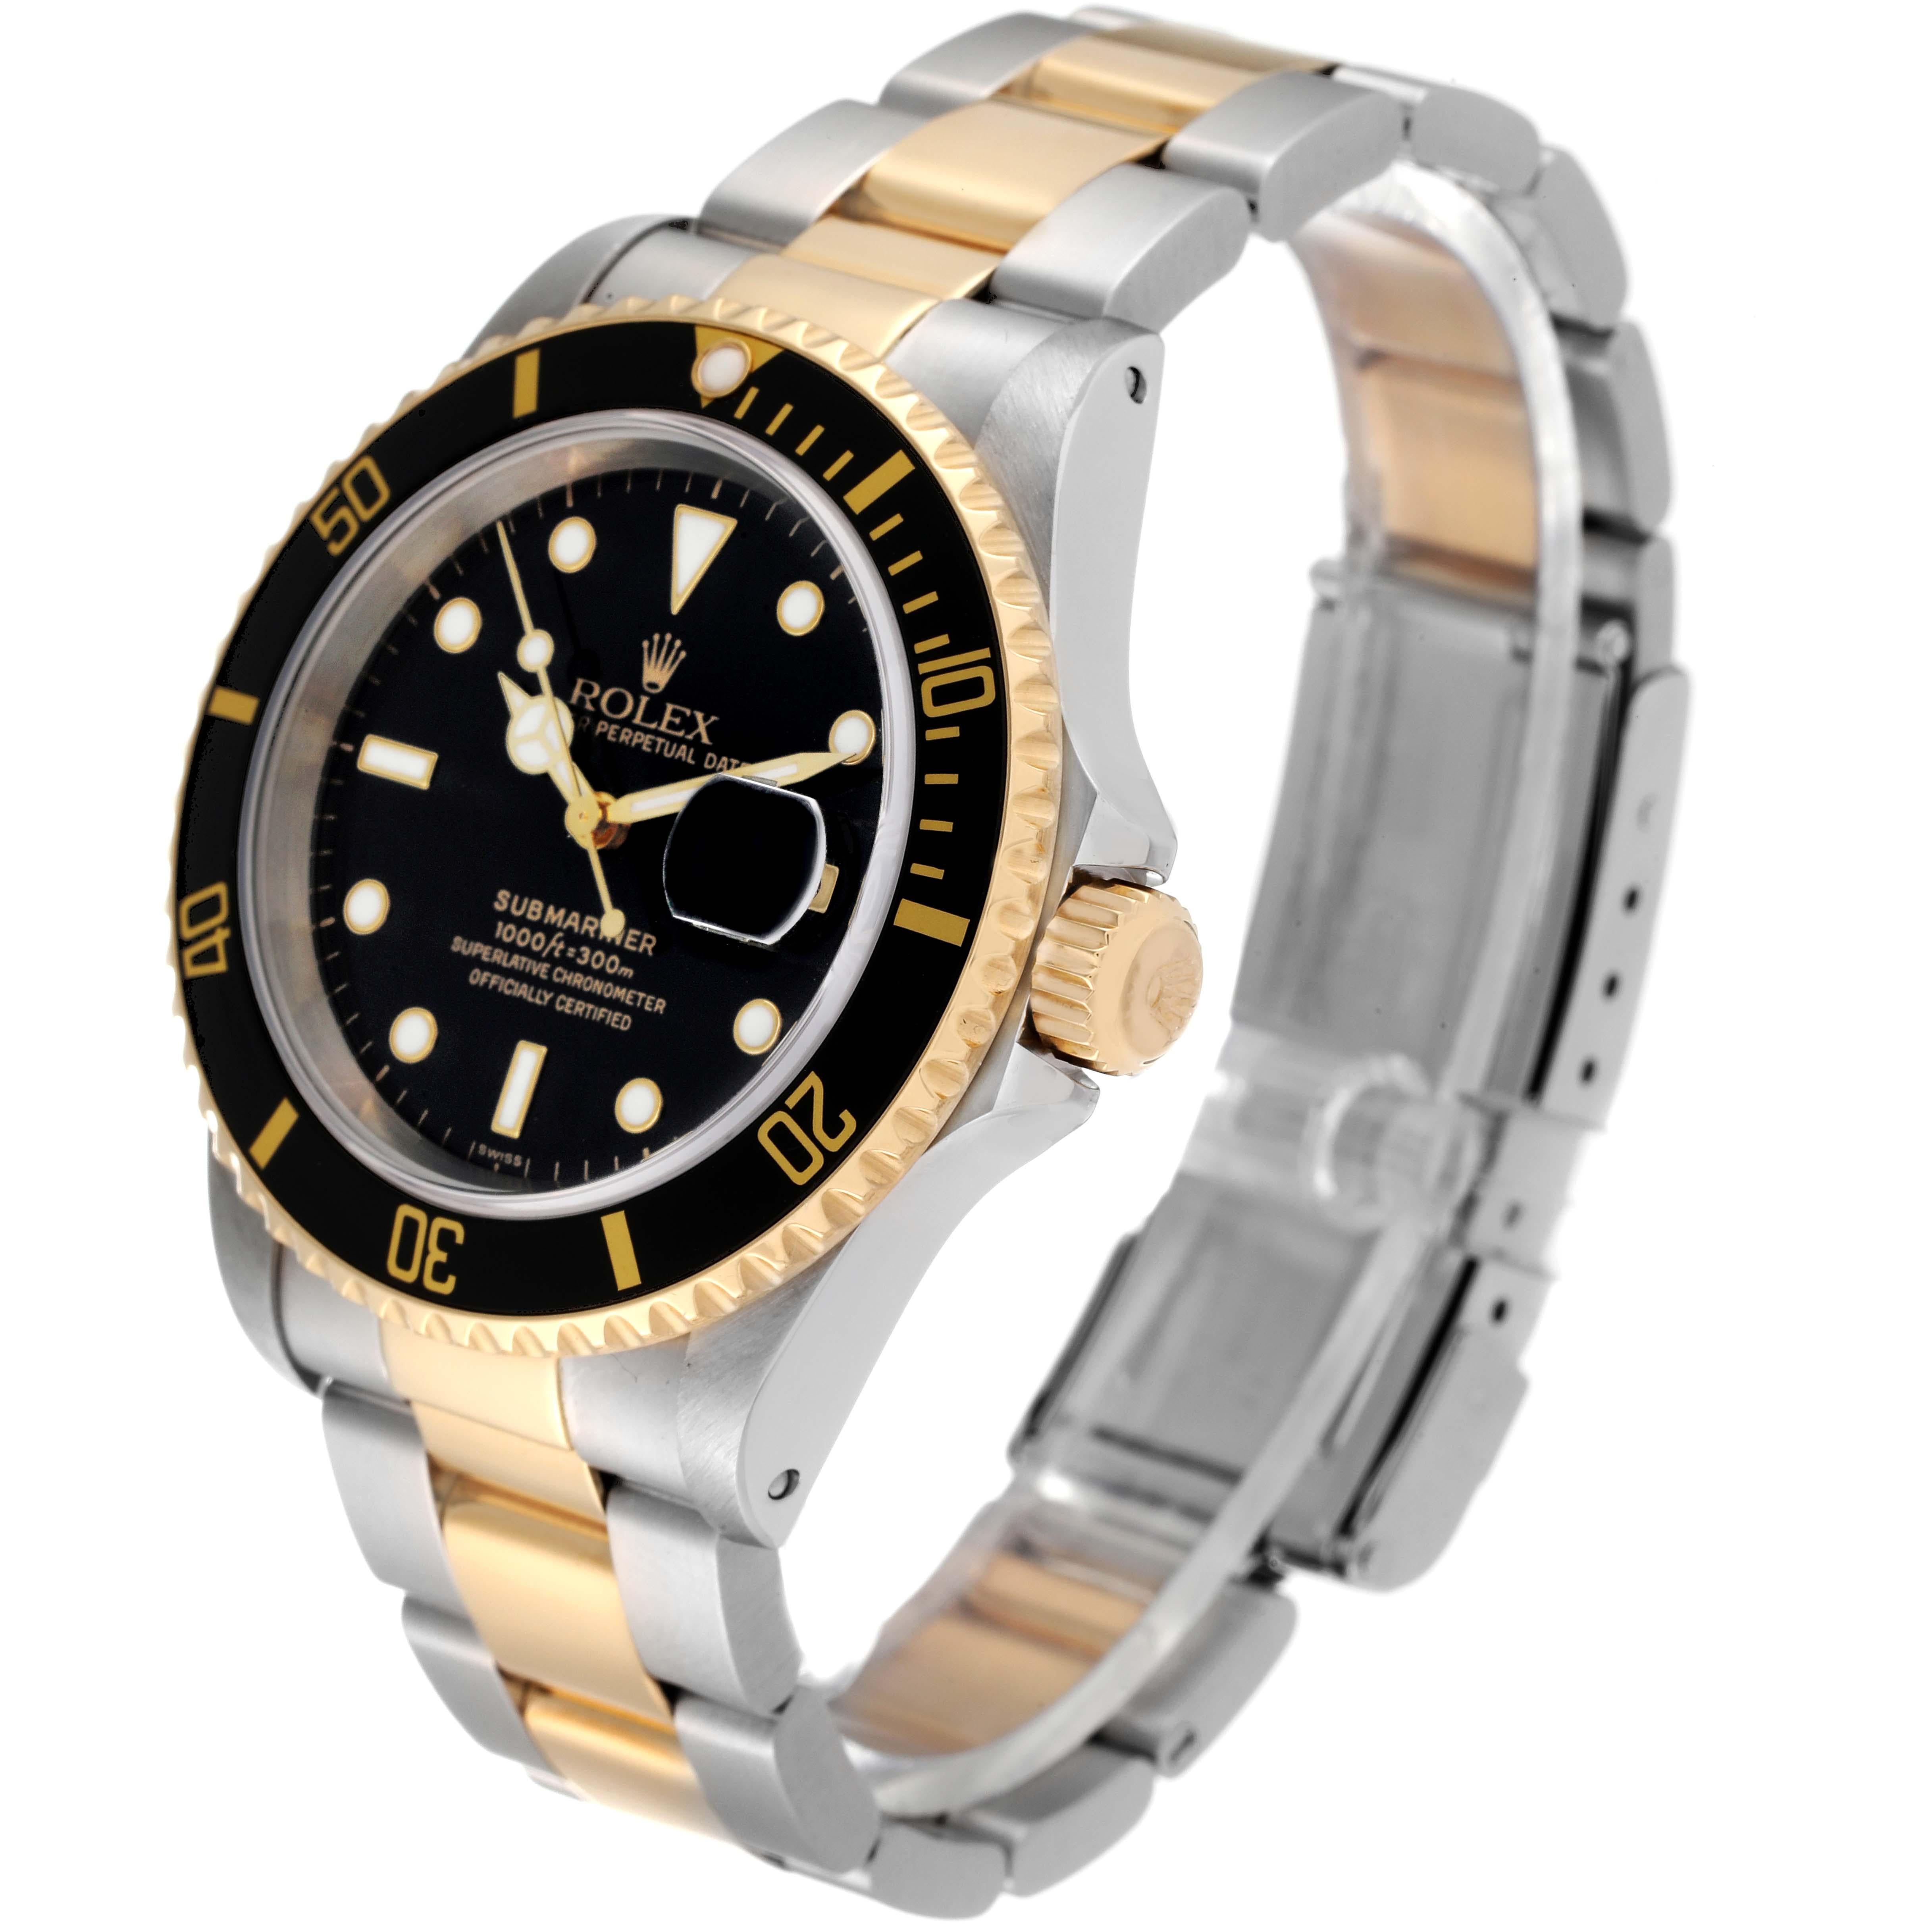 Rolex Submariner Steel Yellow Gold Black Dial Mens Watch 16613 Box Papers In Good Condition For Sale In Atlanta, GA